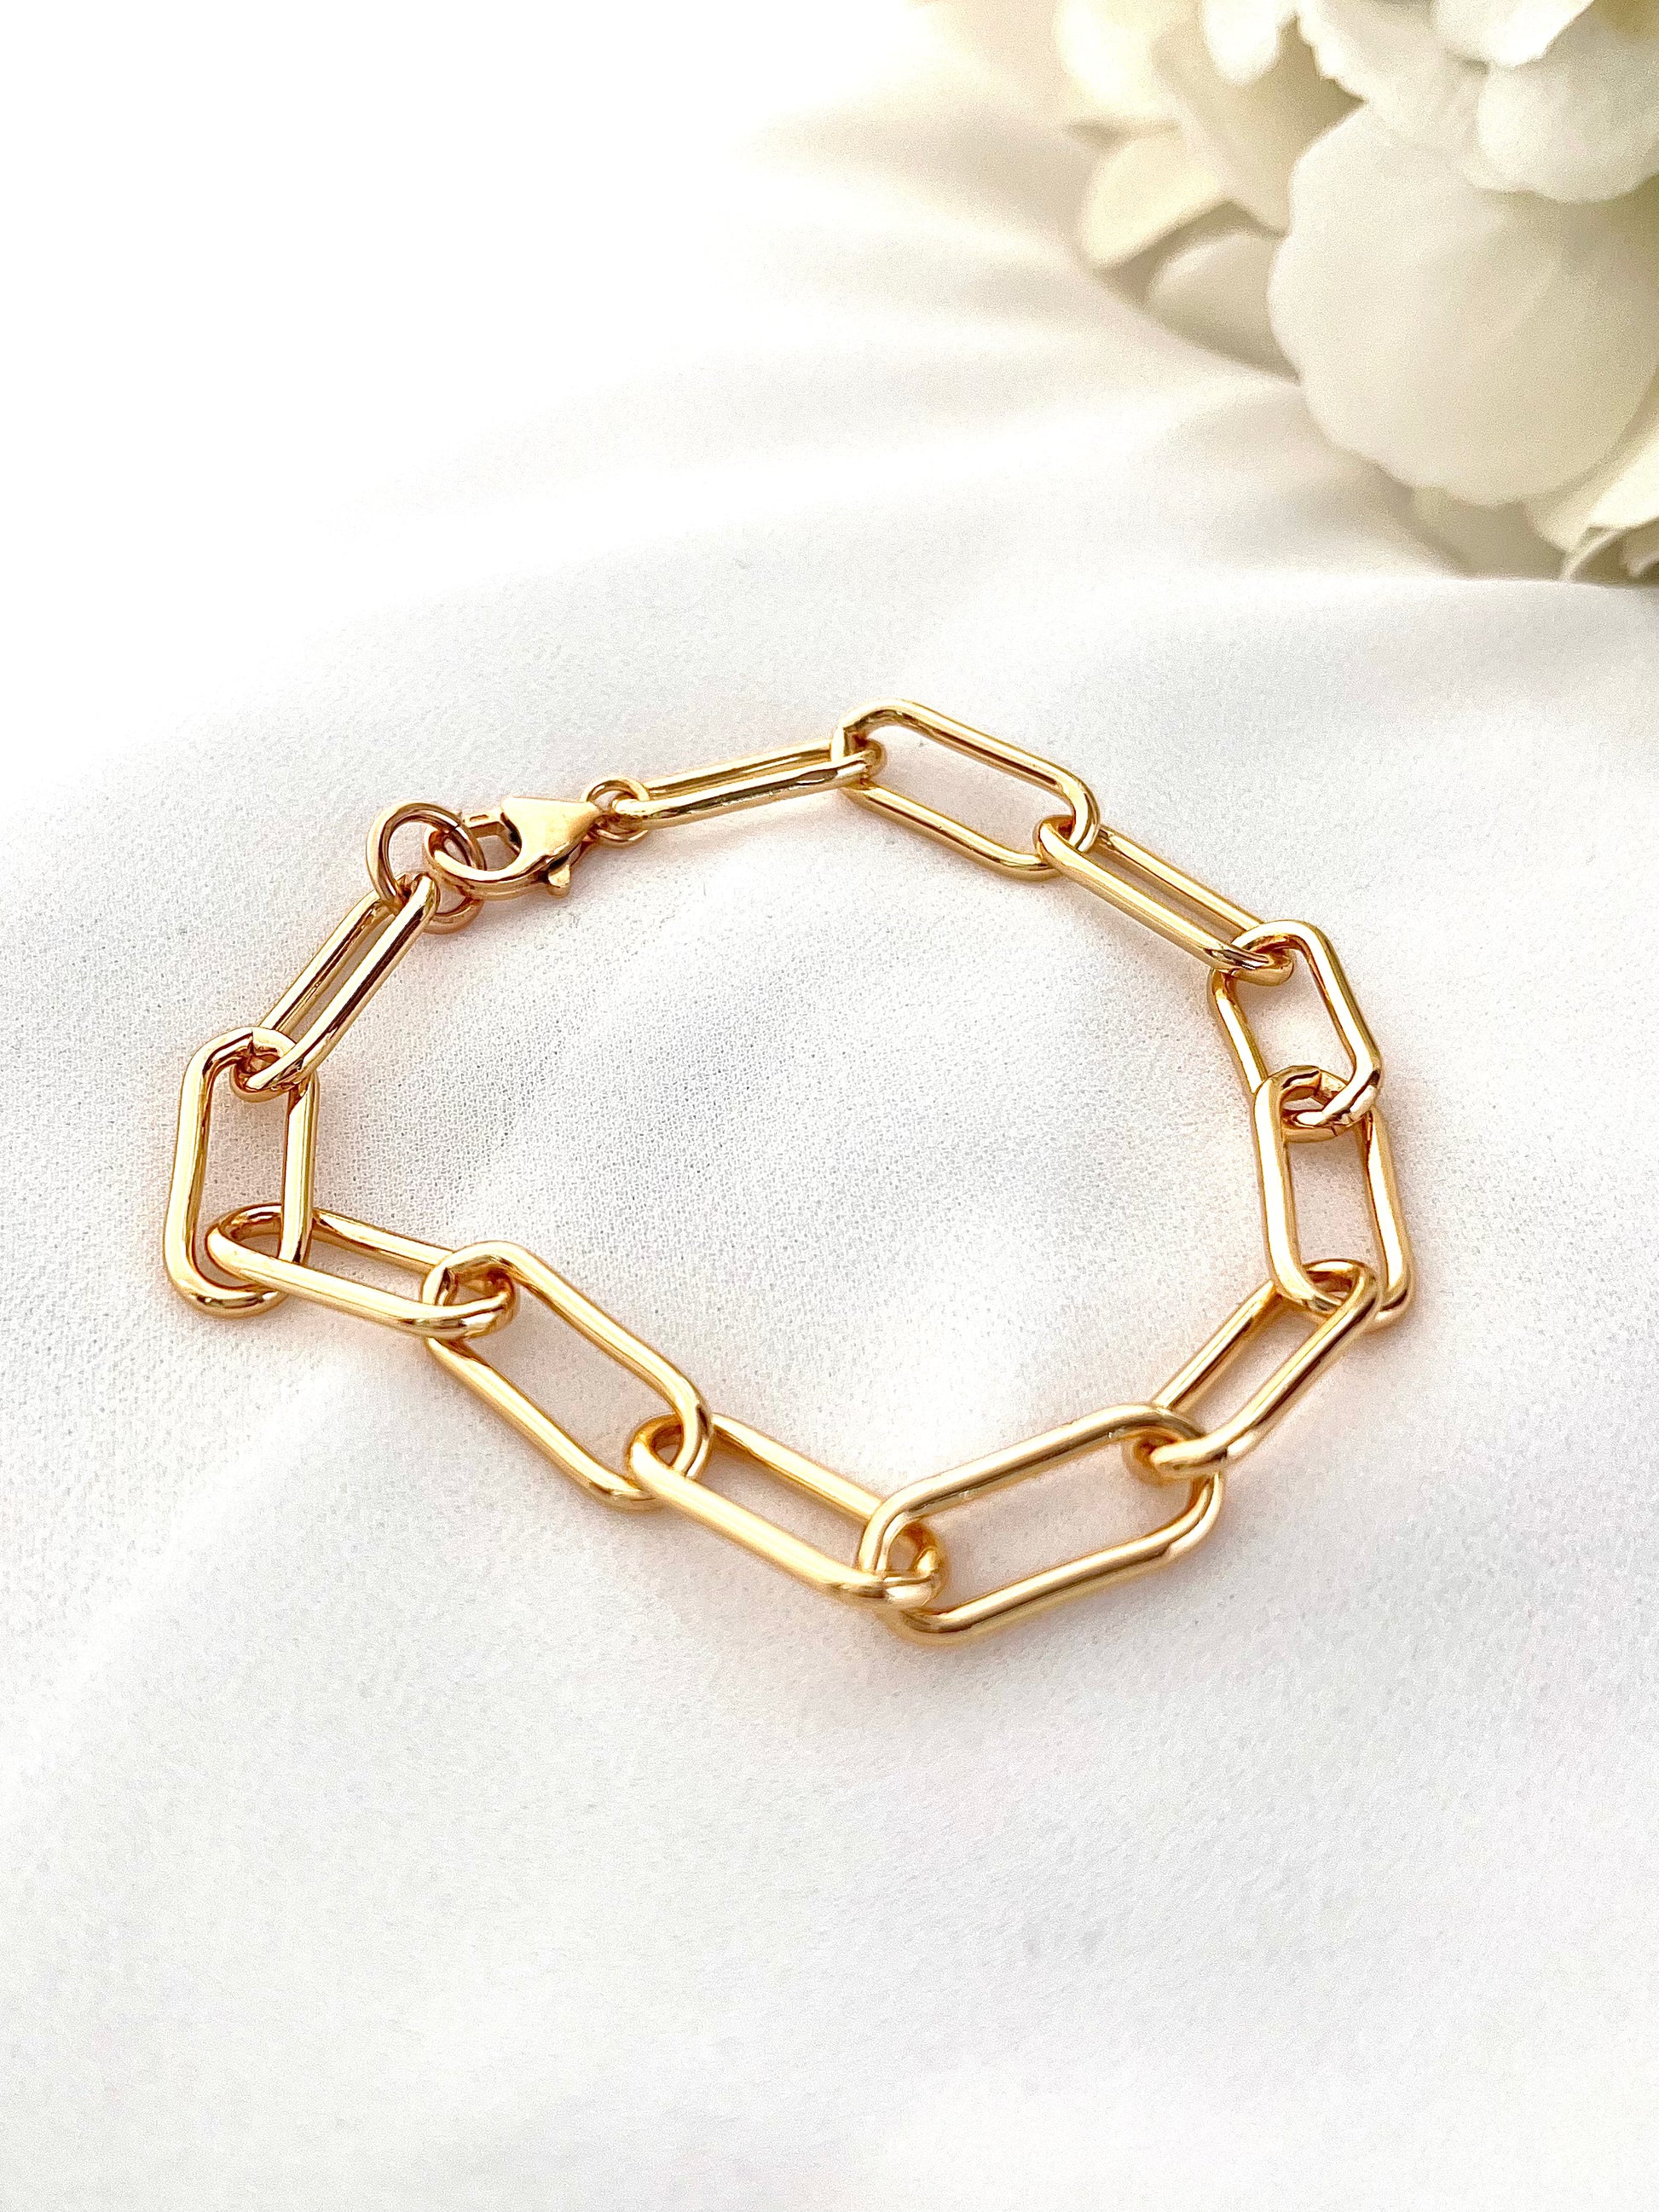 14K Gold Thick Bold Paper Clip Bracelet 6.5 Inches